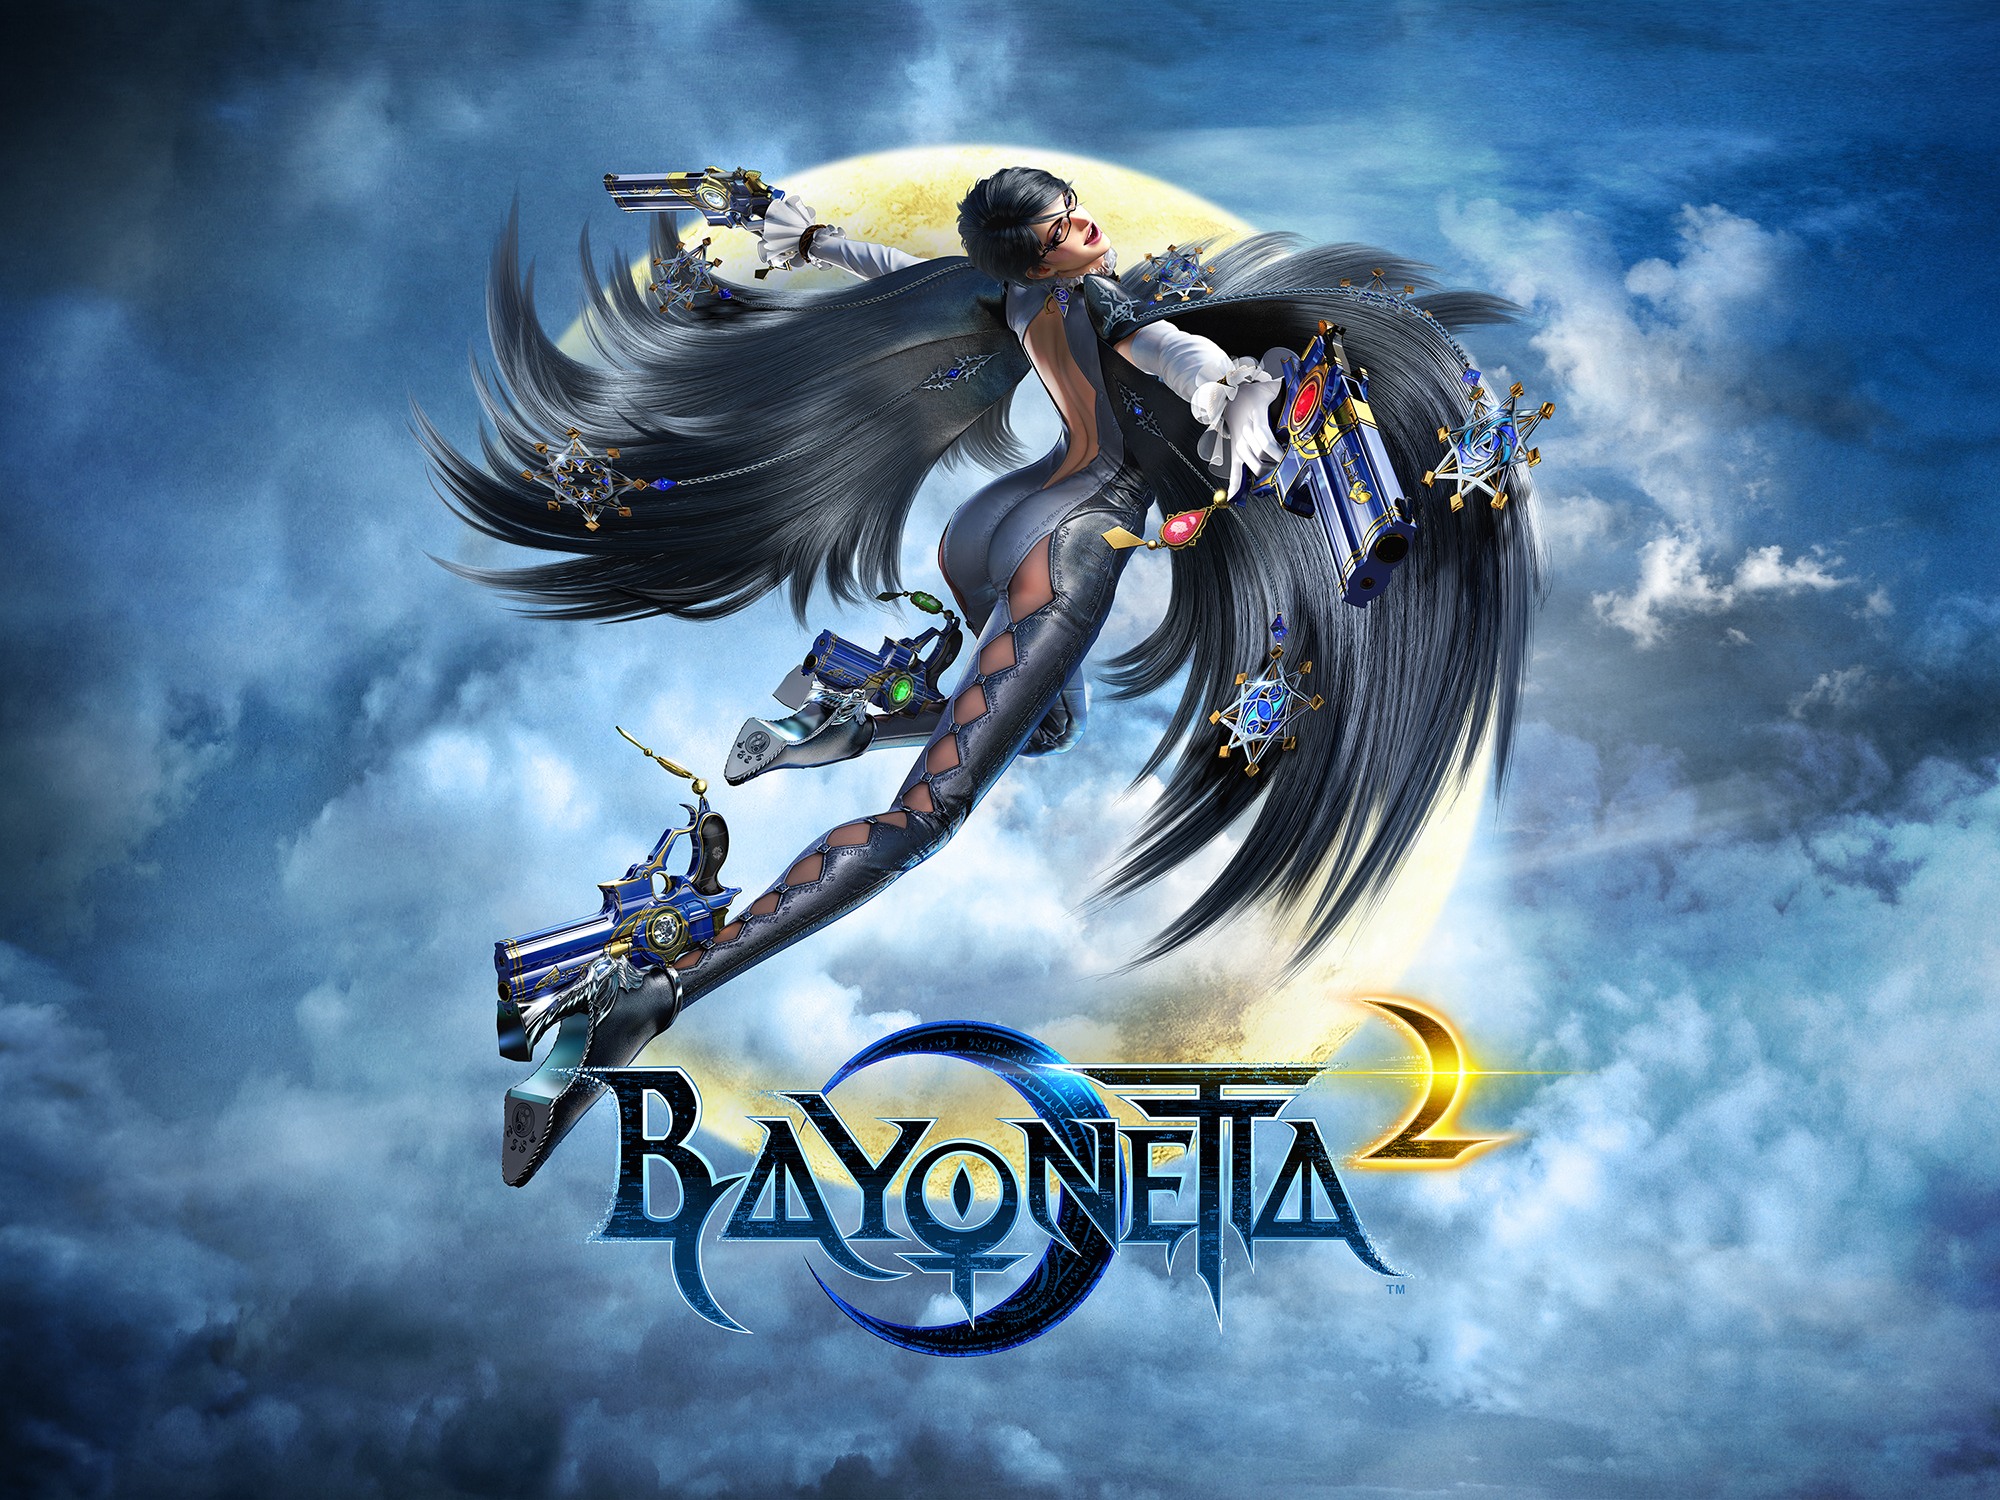 “Bayonetta 2” - Star of Action Has Arrived to the Party